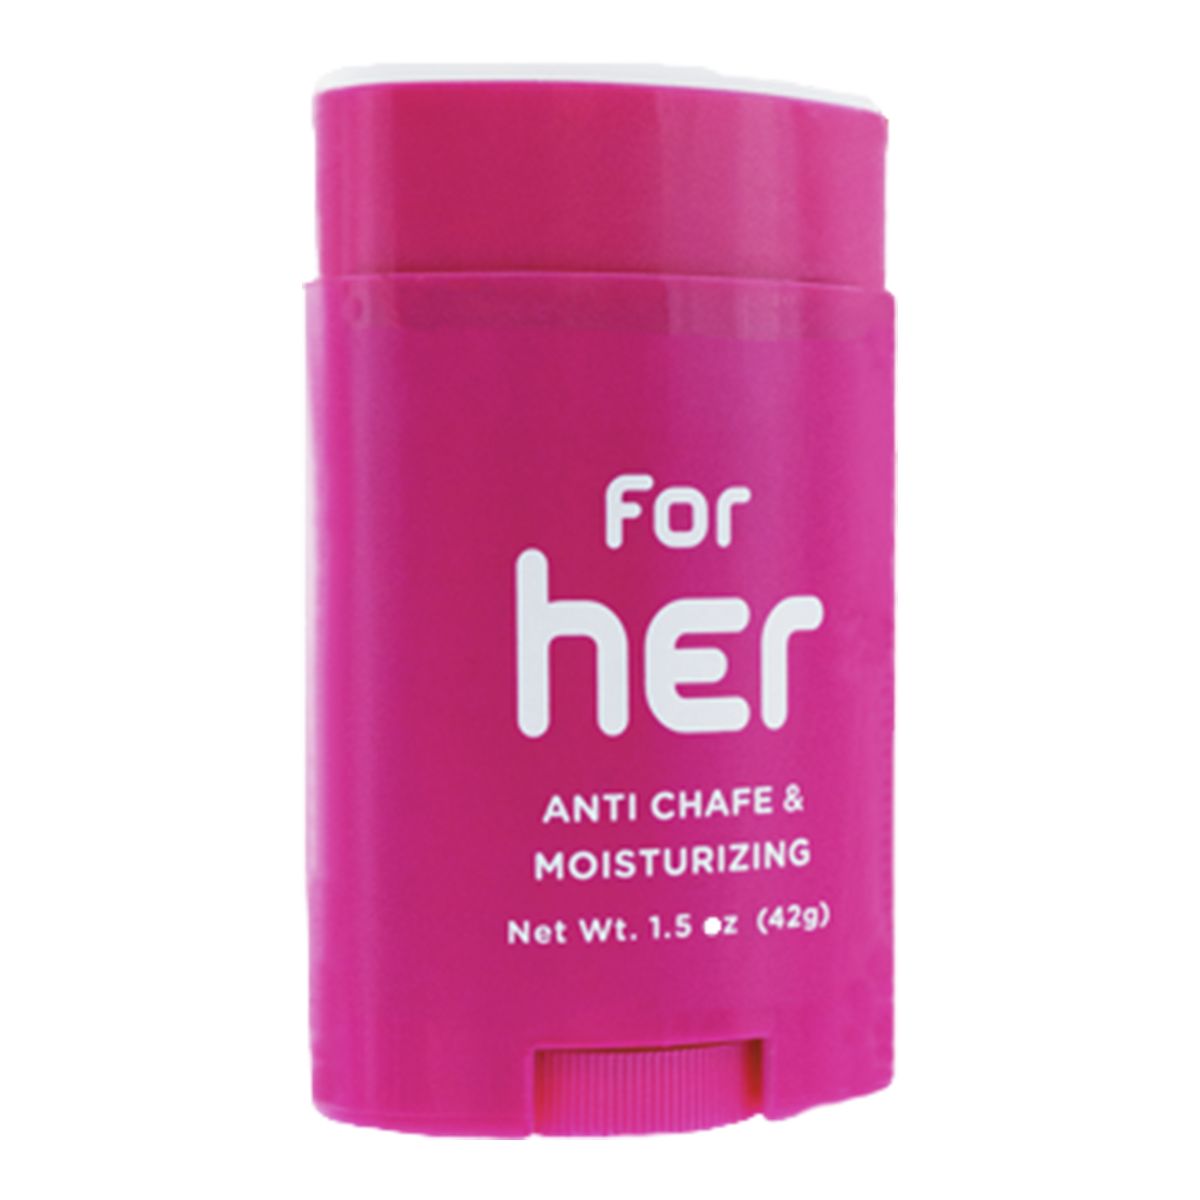 Body Glide For Her Anti-Blister Stick - 1.5oz.